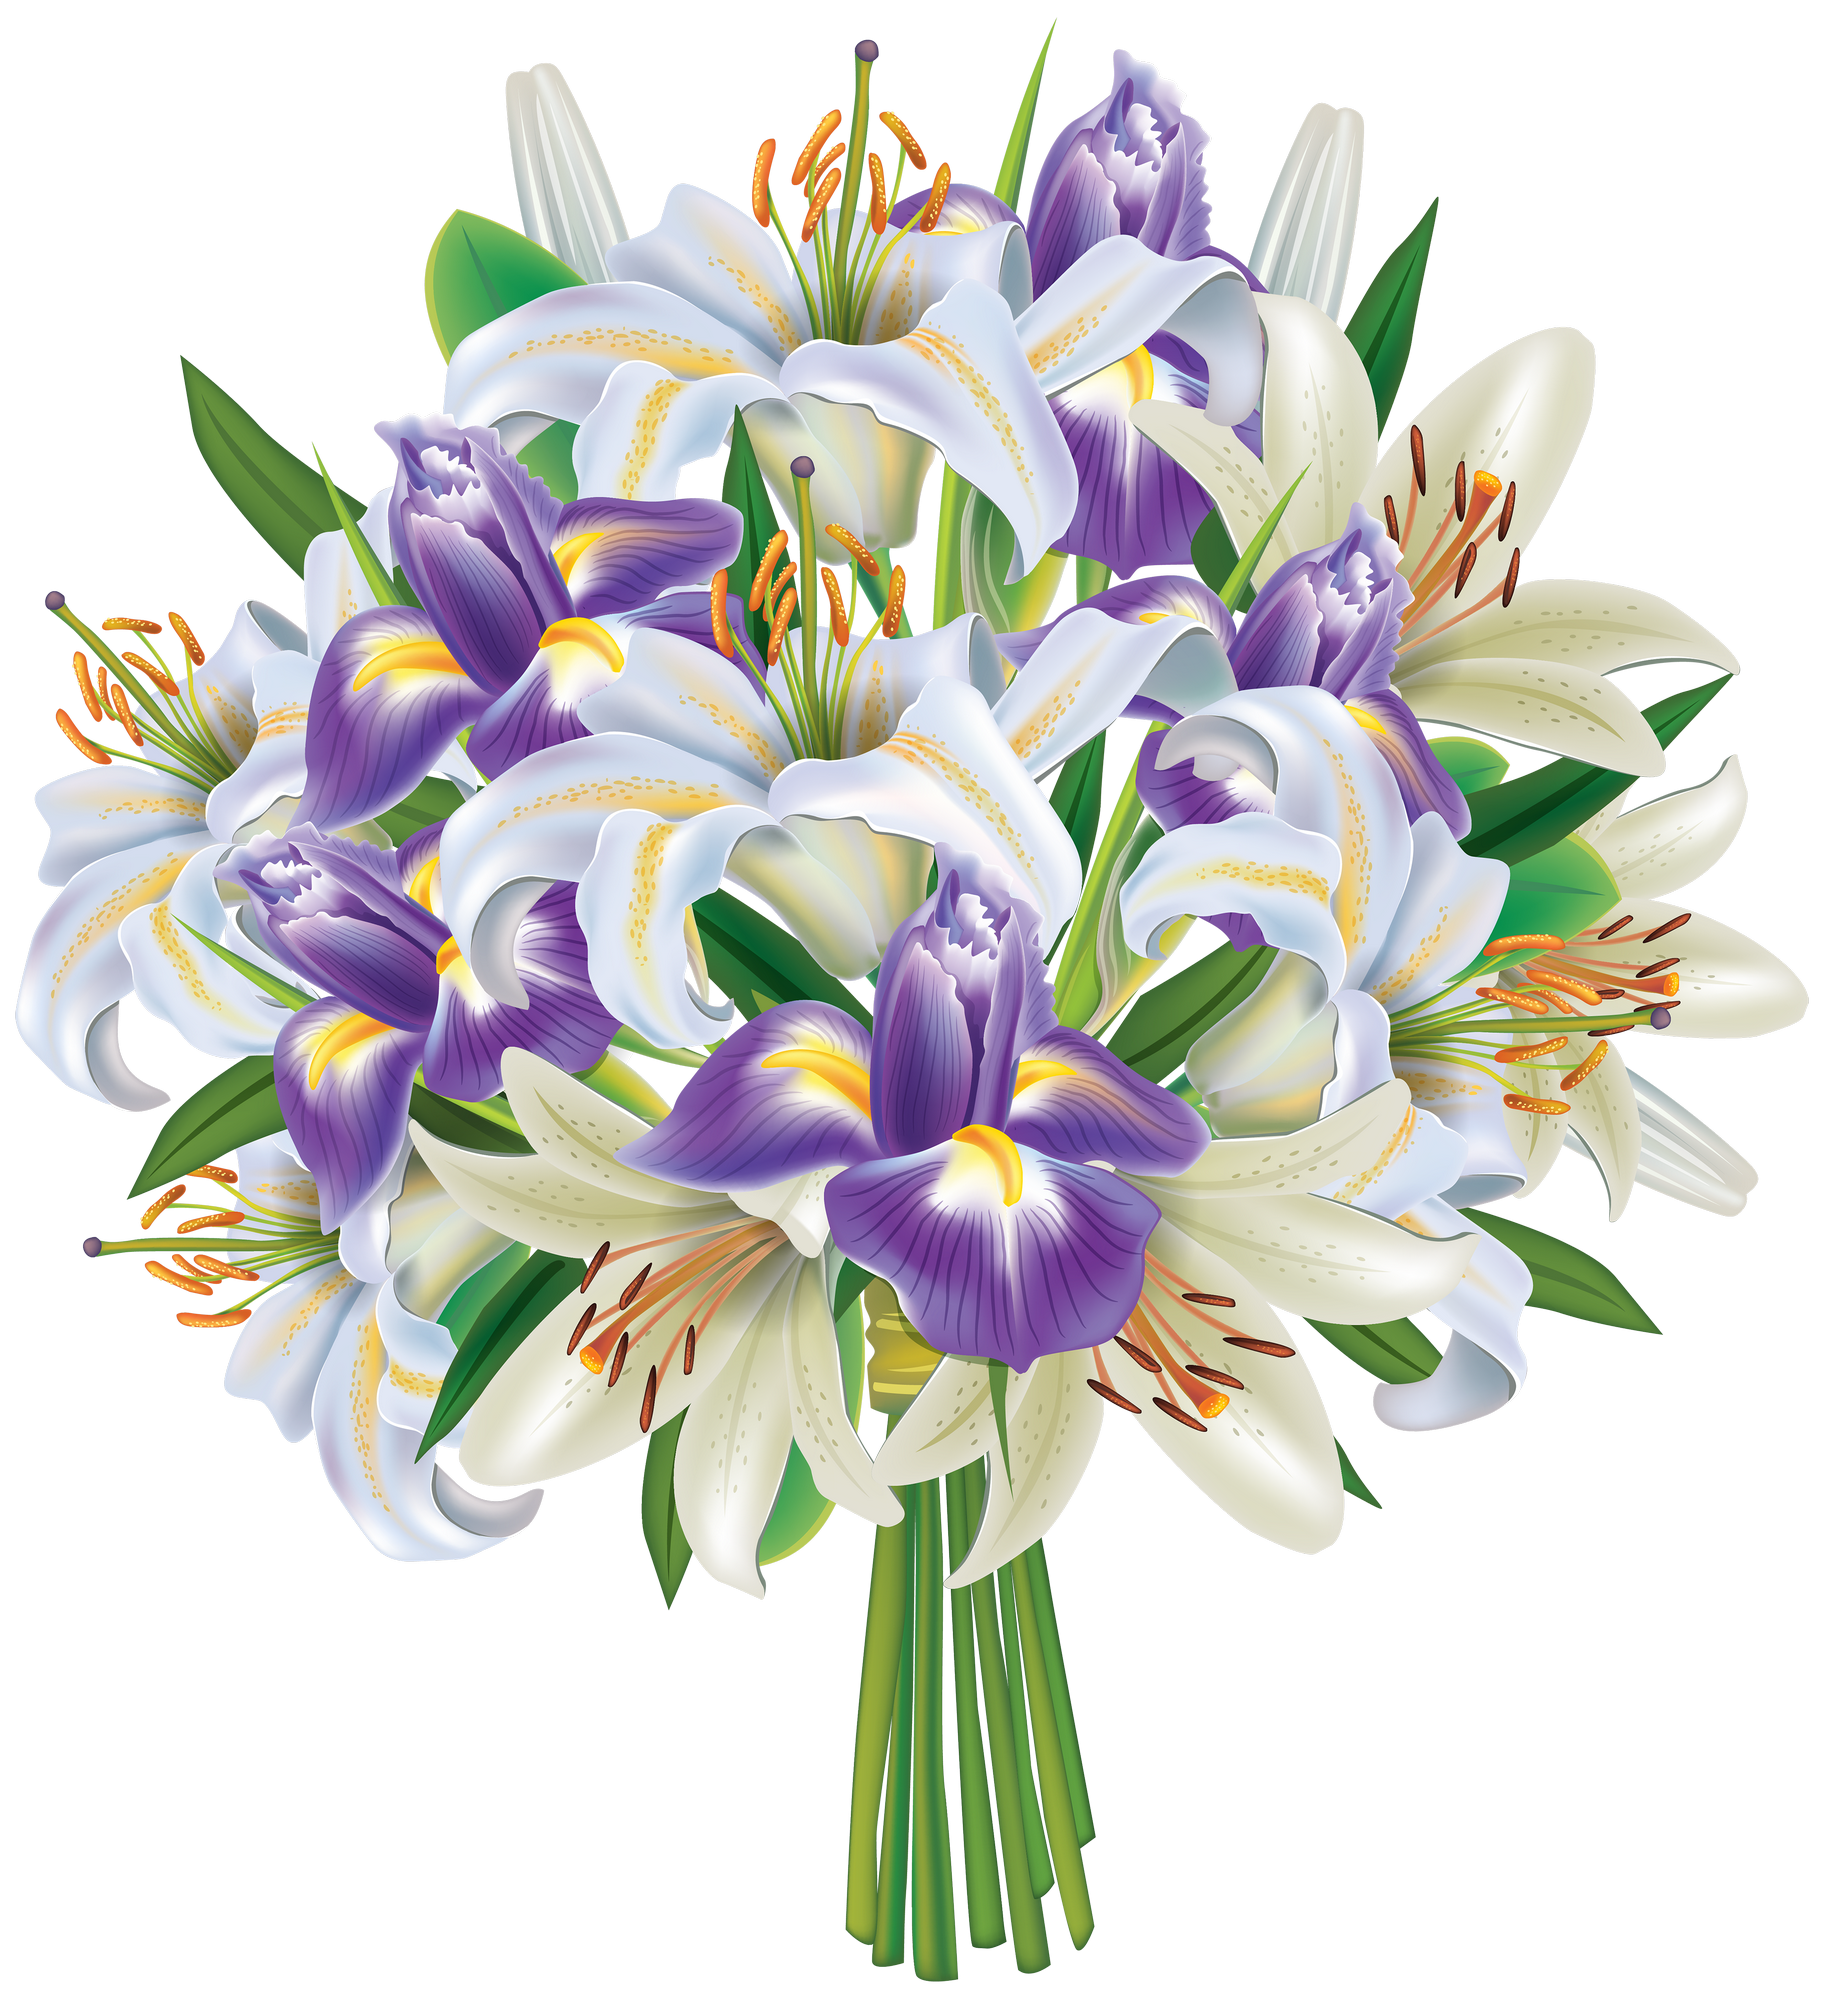 Pin by charudeal on. Lily clipart flower boquet